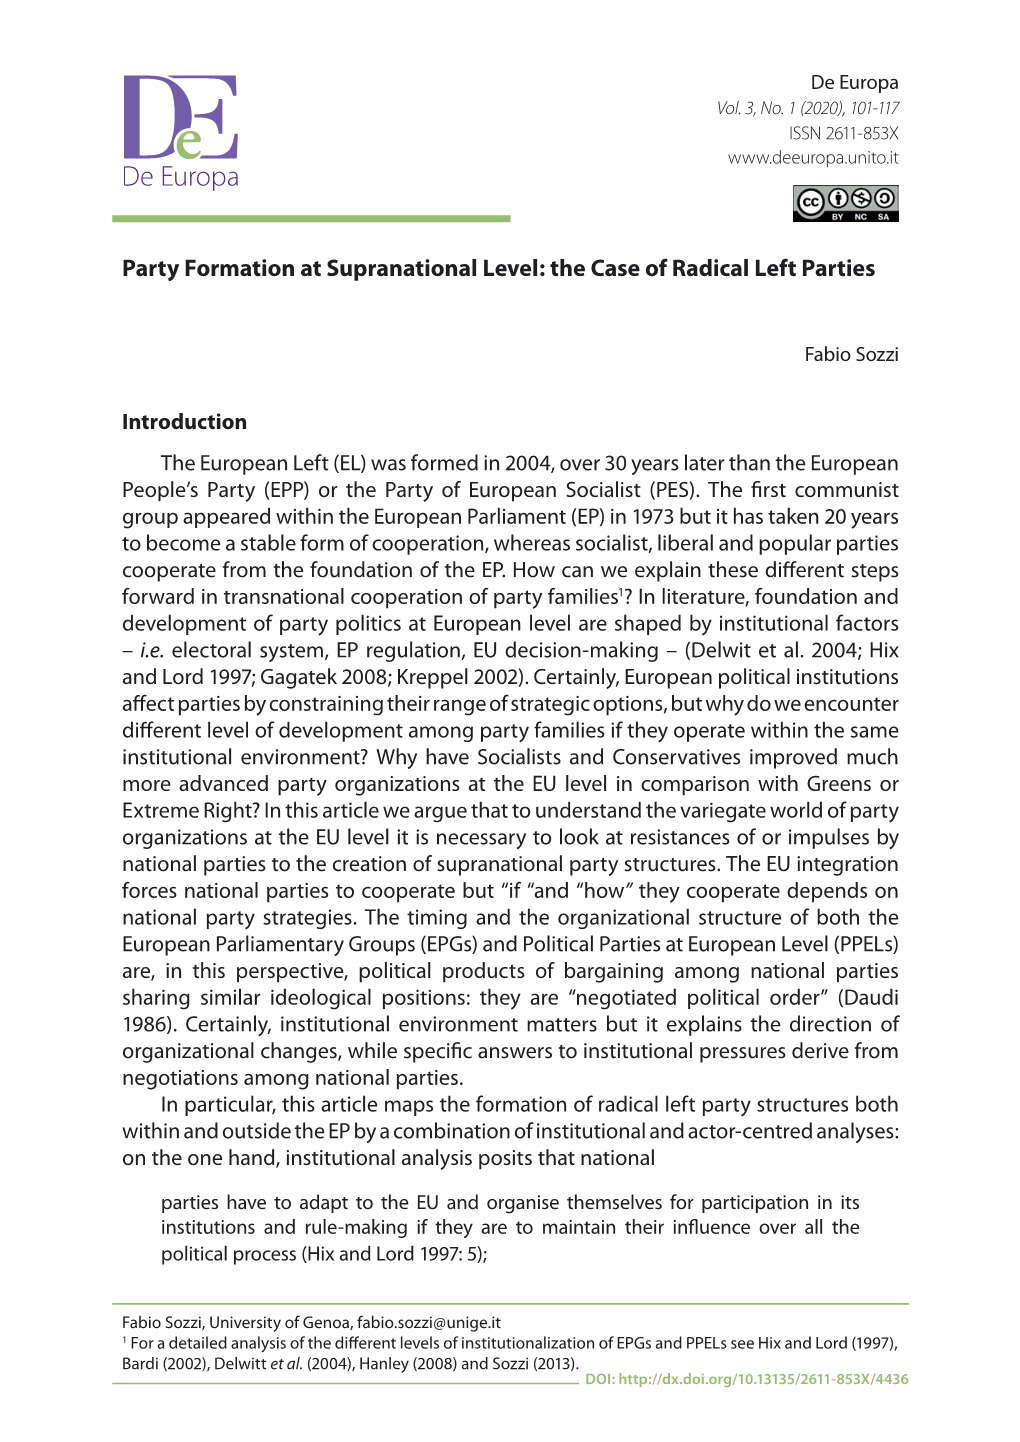 Party Formation at Supranational Level: the Case of Radical Left Parties